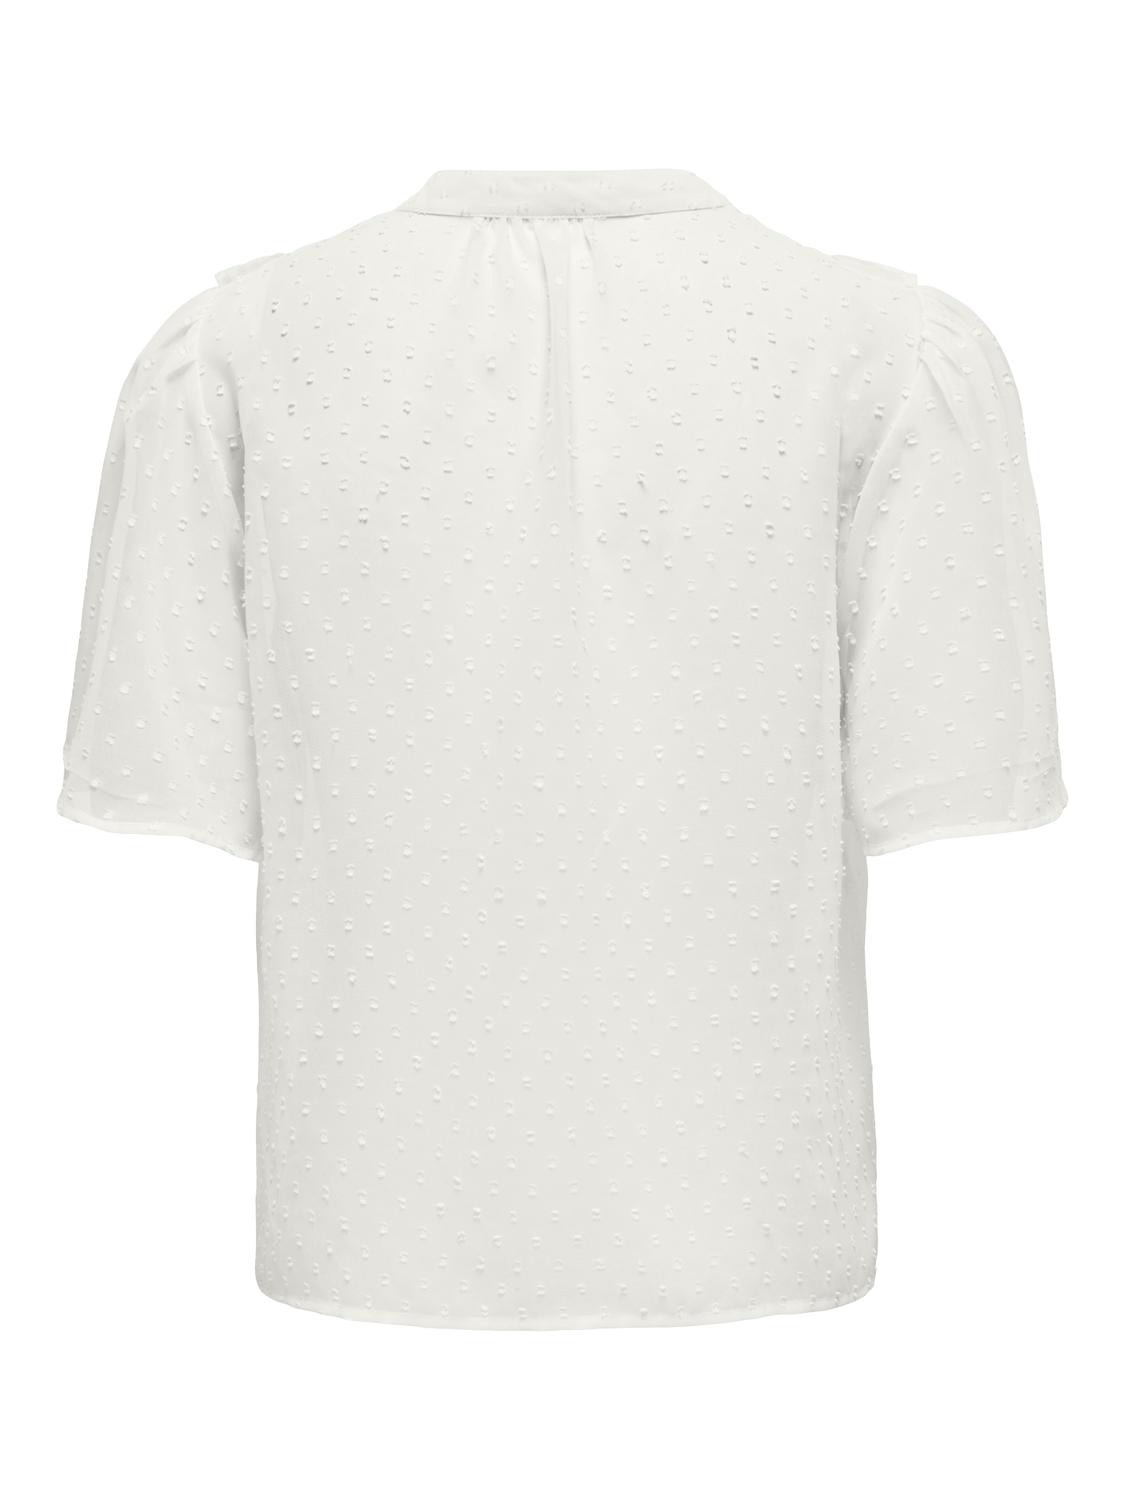 ONLY China collar top with frills -Cloud Dancer - 15323277